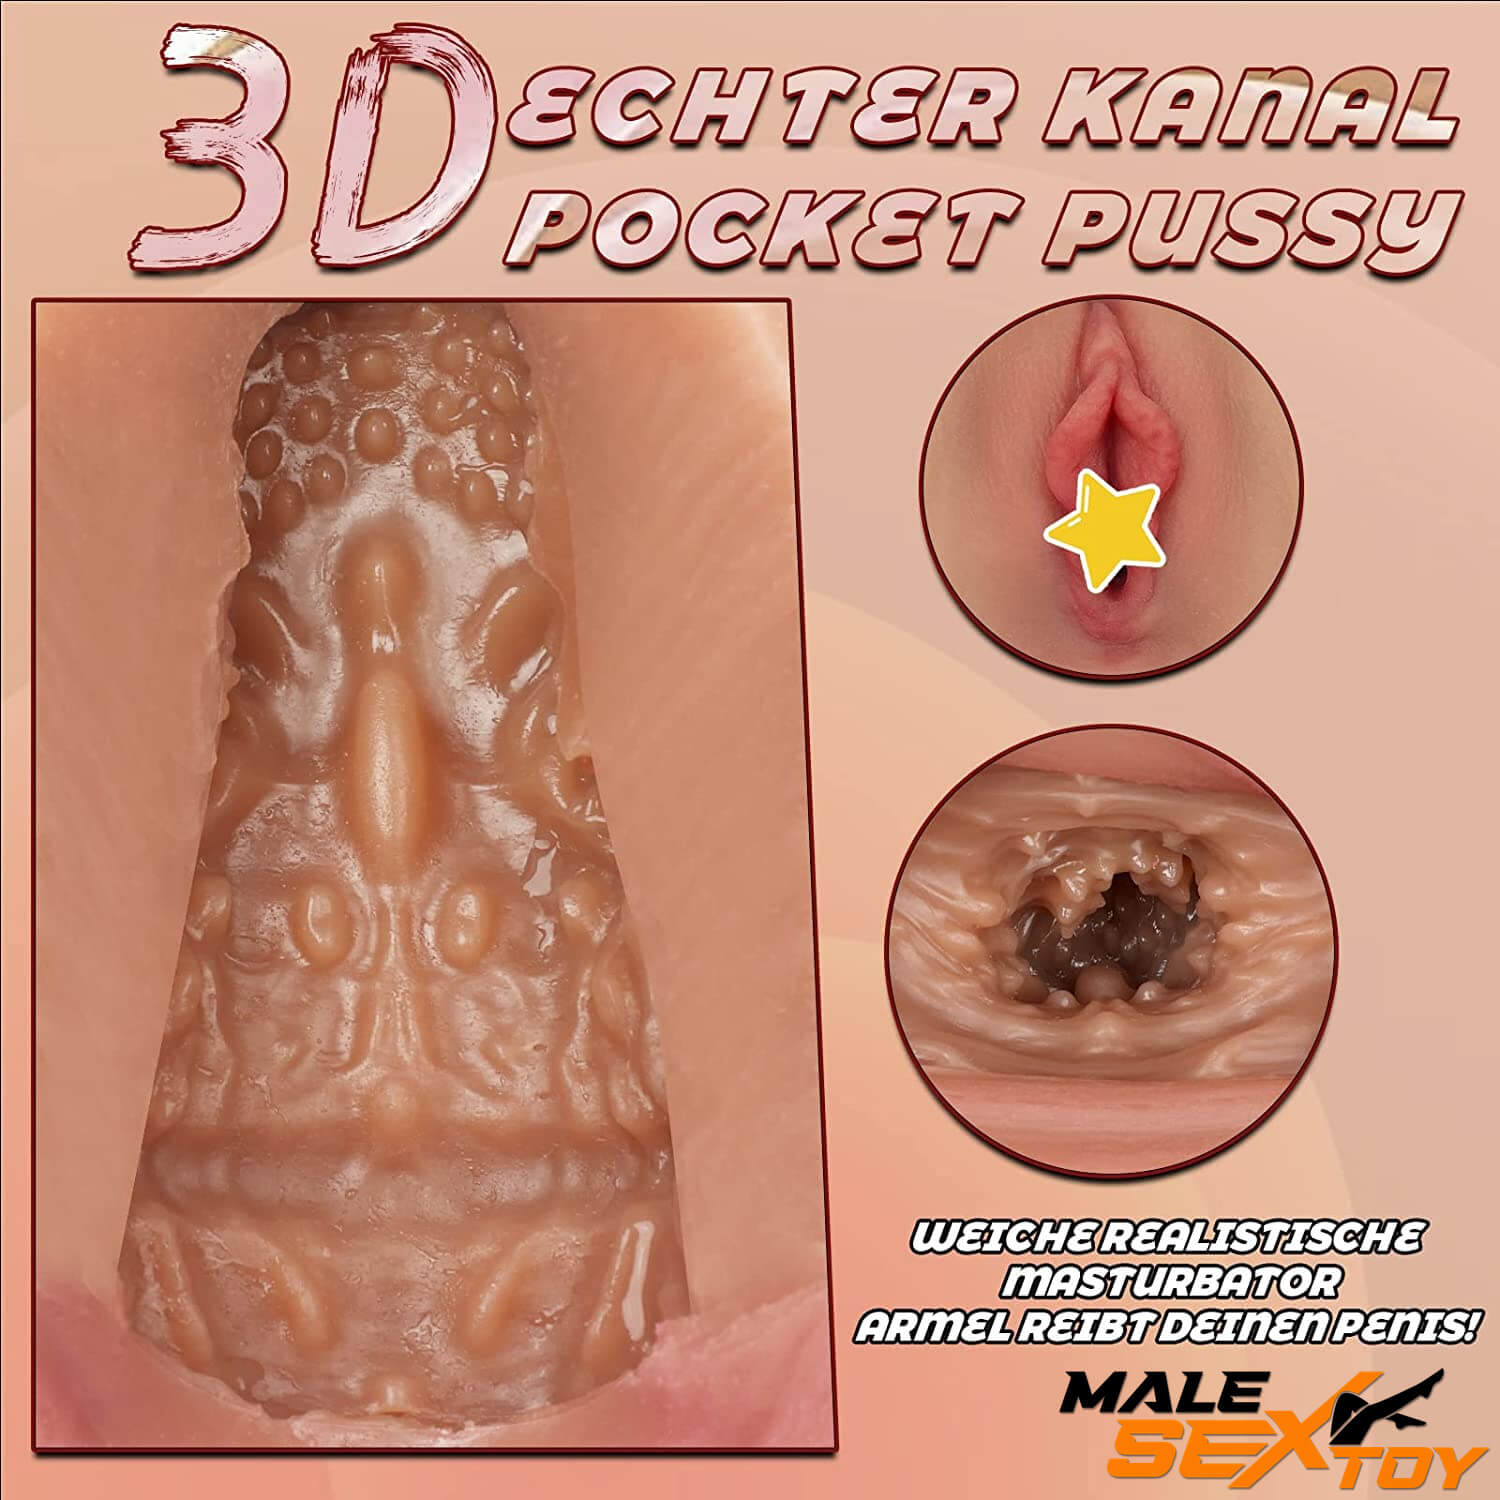 2In1 Realistic Vibrating Anal Pocket Pussy Sex Toy Male Masturbator